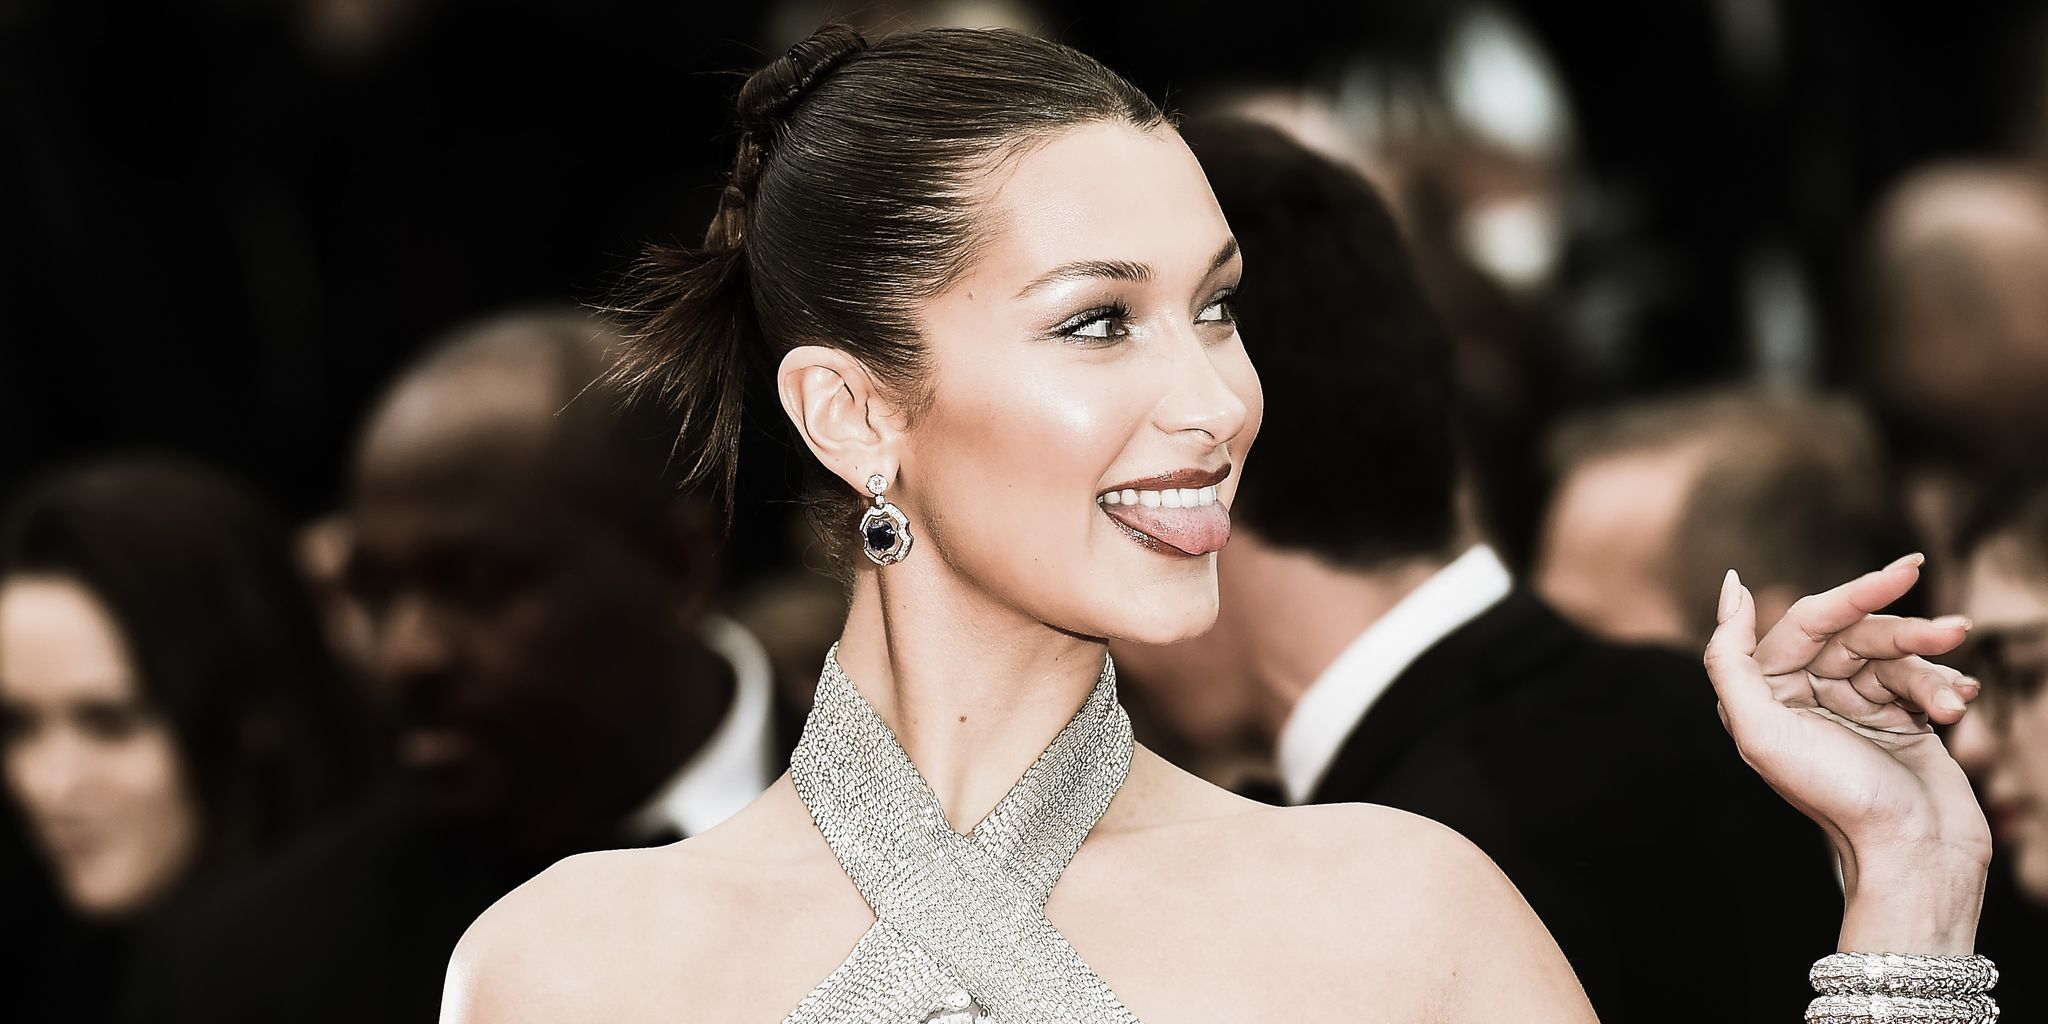 See Bella Hadid's Vintage Gucci Look Straight from the '90s